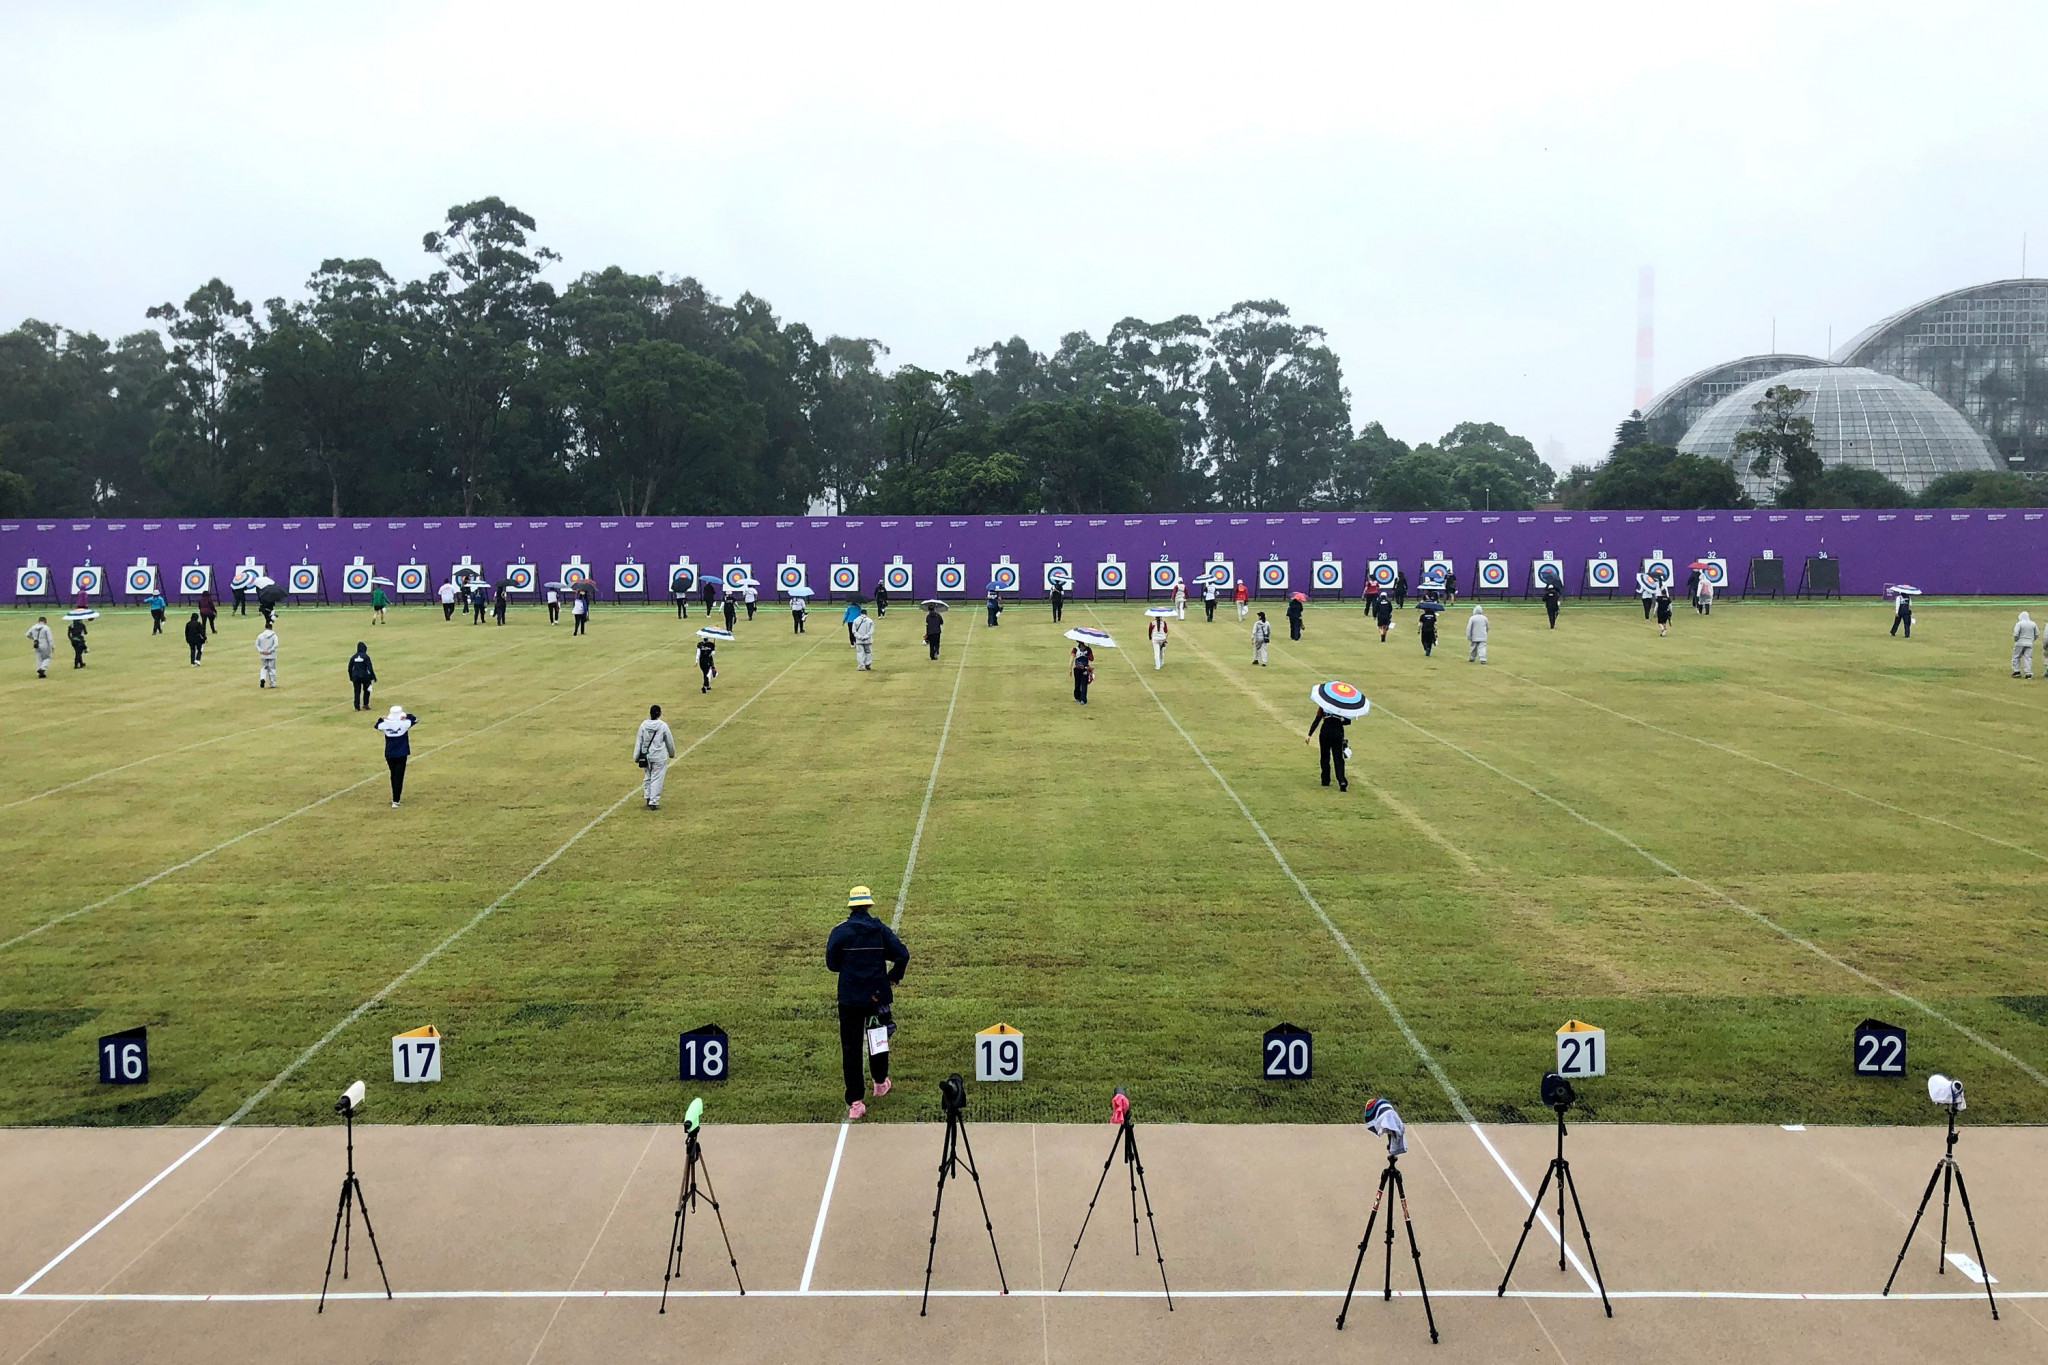 World Archery and Tokyo 2020 launch investigation into alleged incident at test event